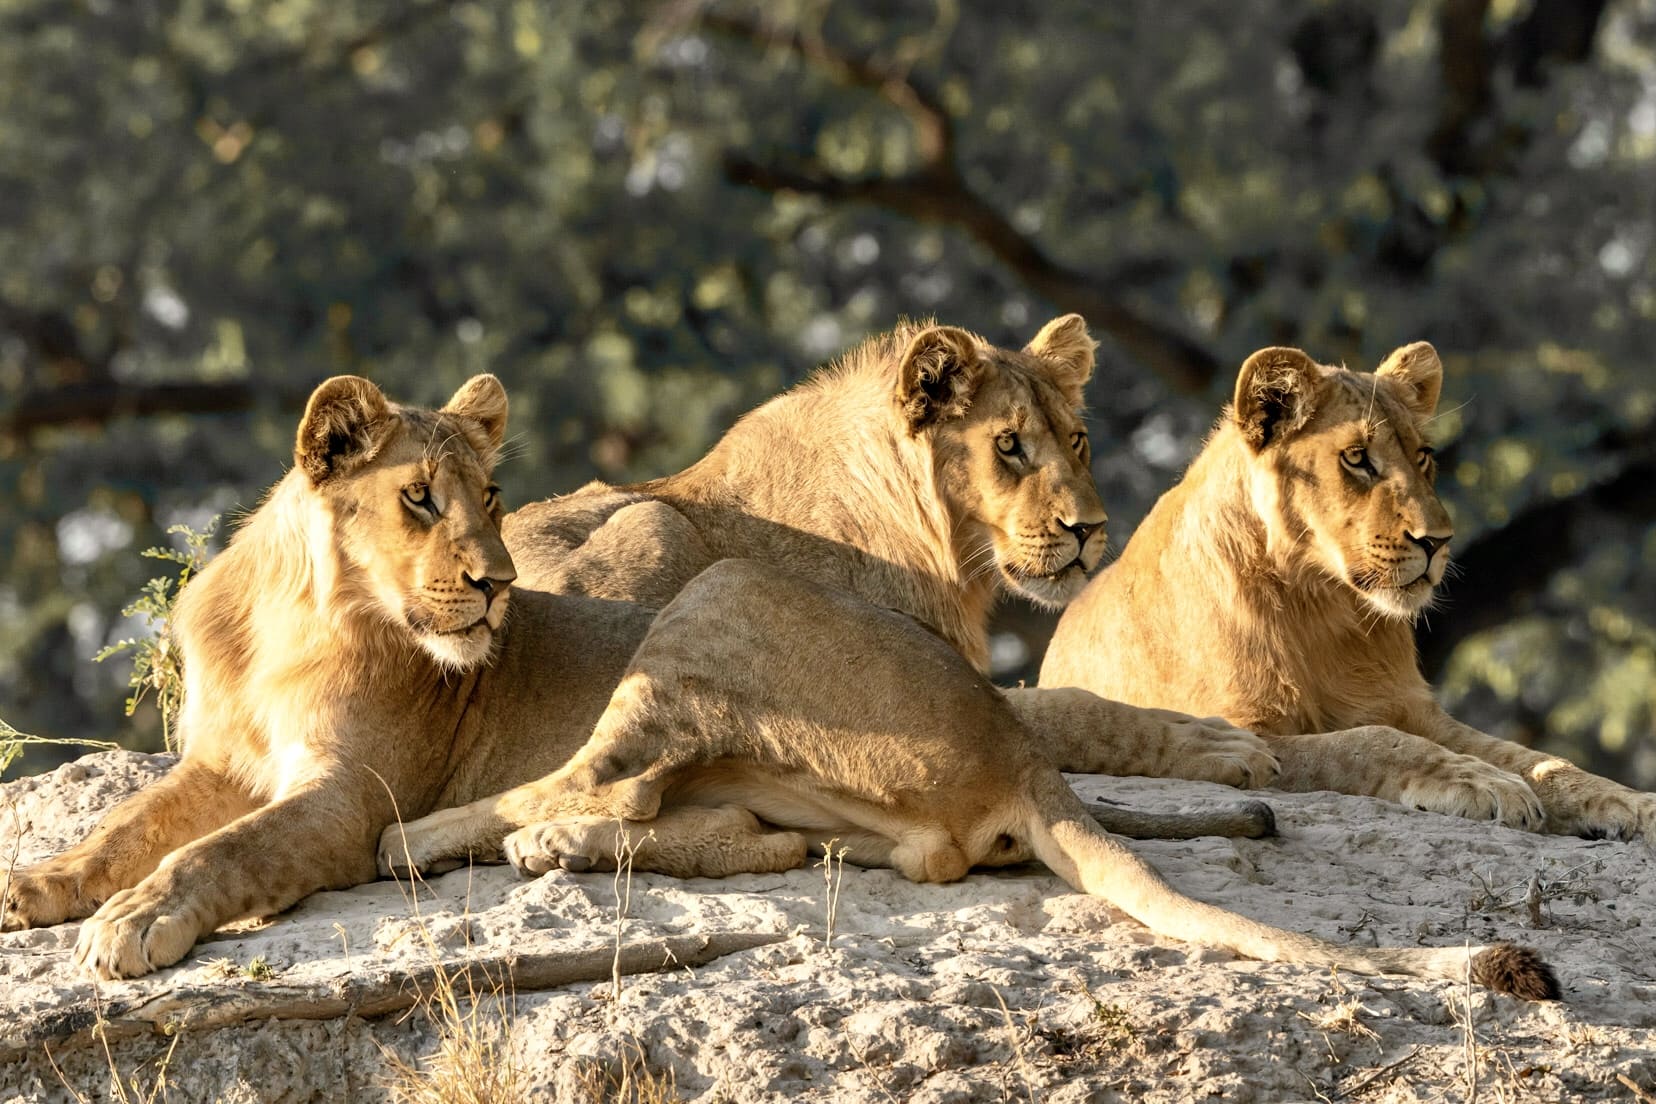 3 lions looking intently with the suns late afternoon rays